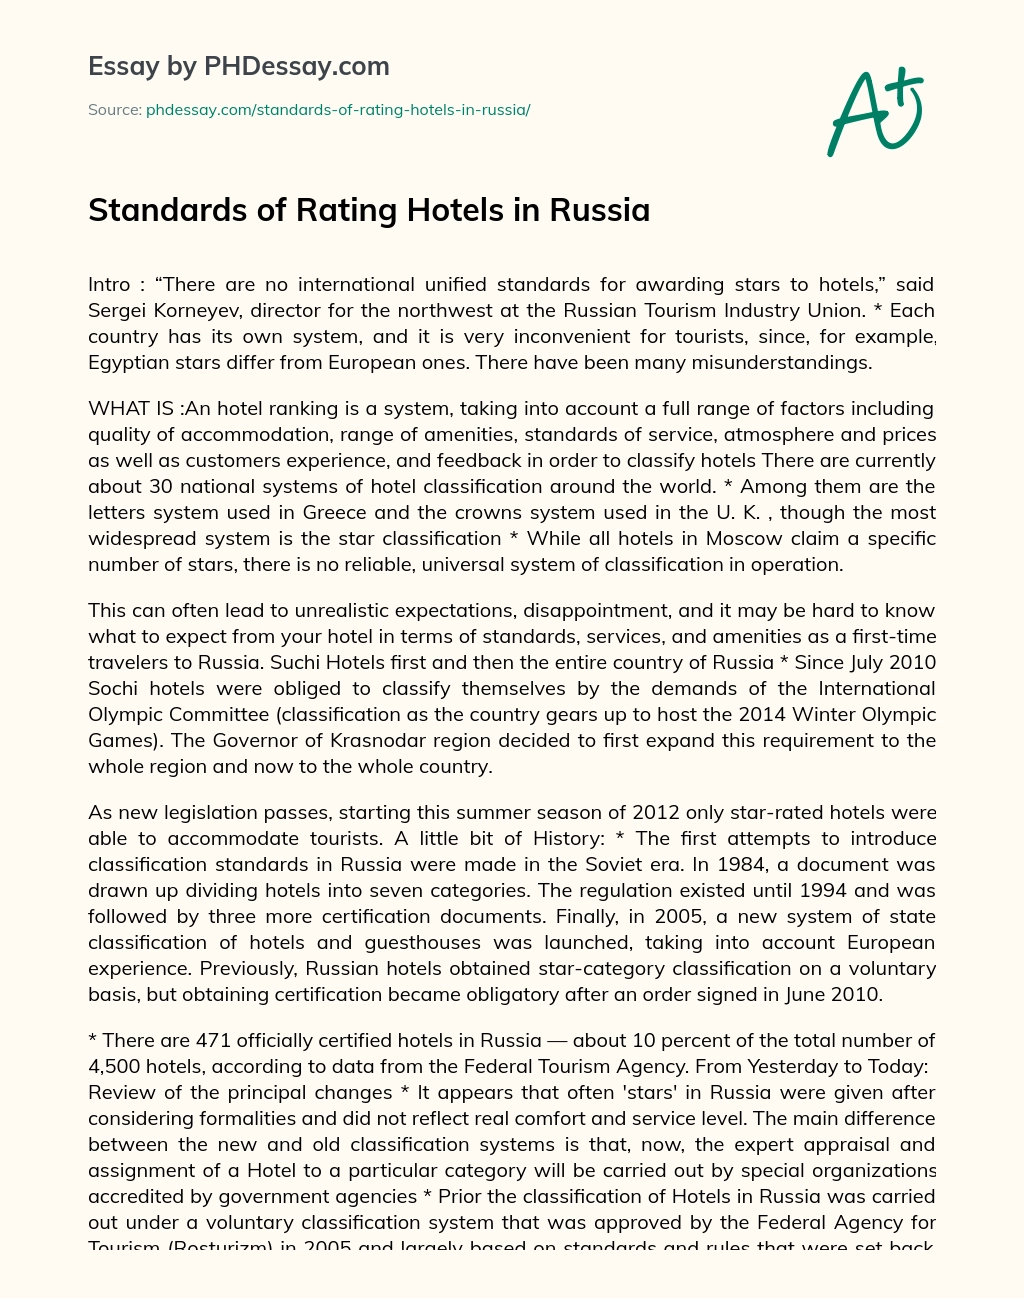 Standards of Rating Hotels in Russia essay